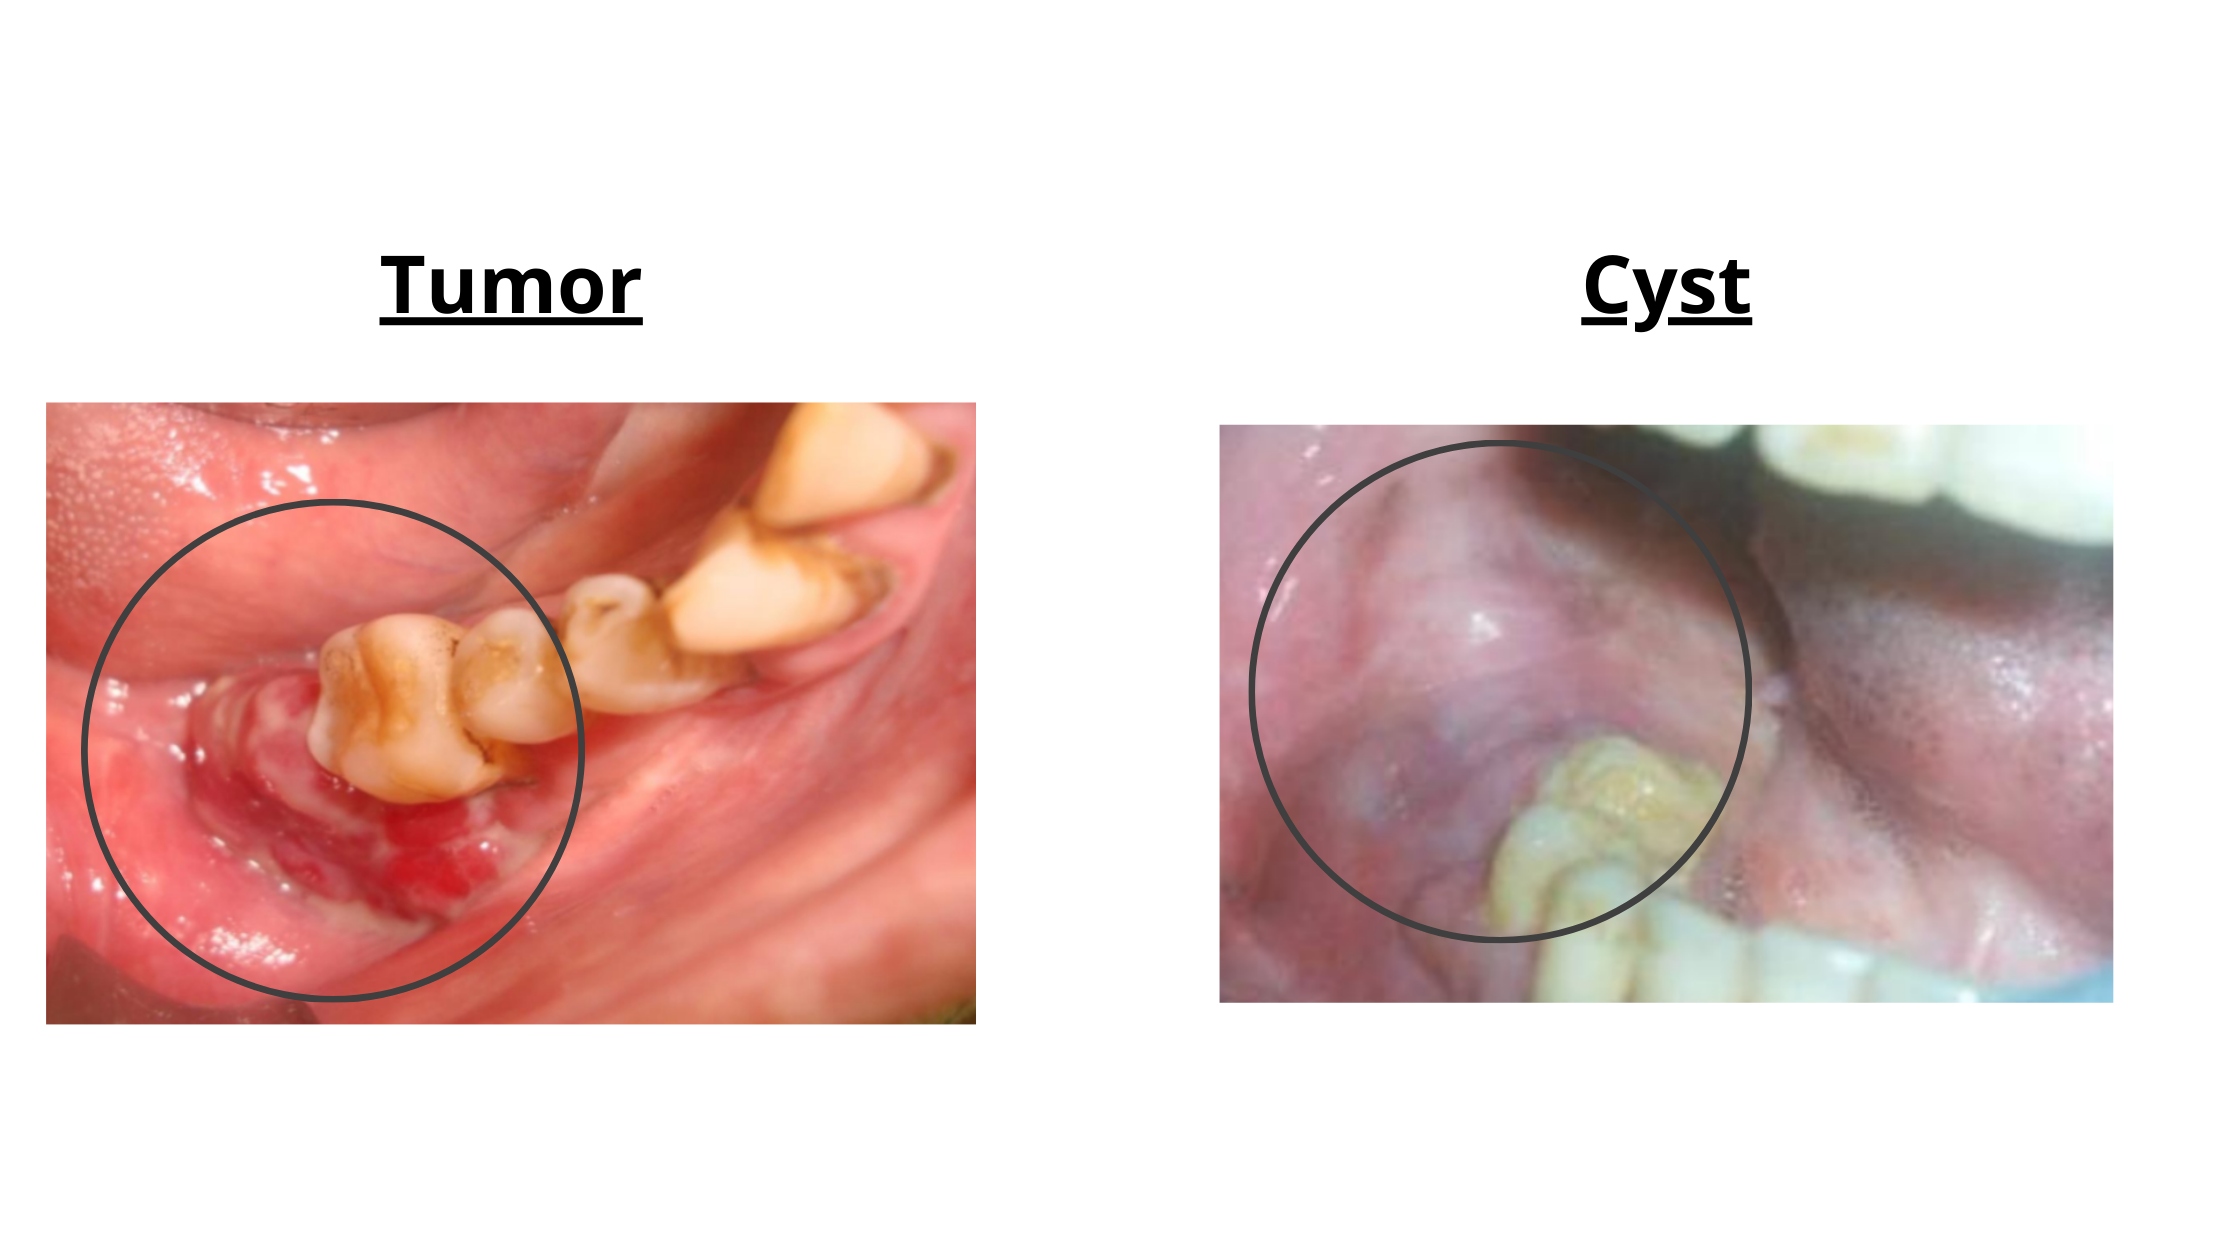 clinical comparison of cysts and tumors around wisdom teeth (a cyst is more regular and well-defined, whereas a tumor is the opposite)